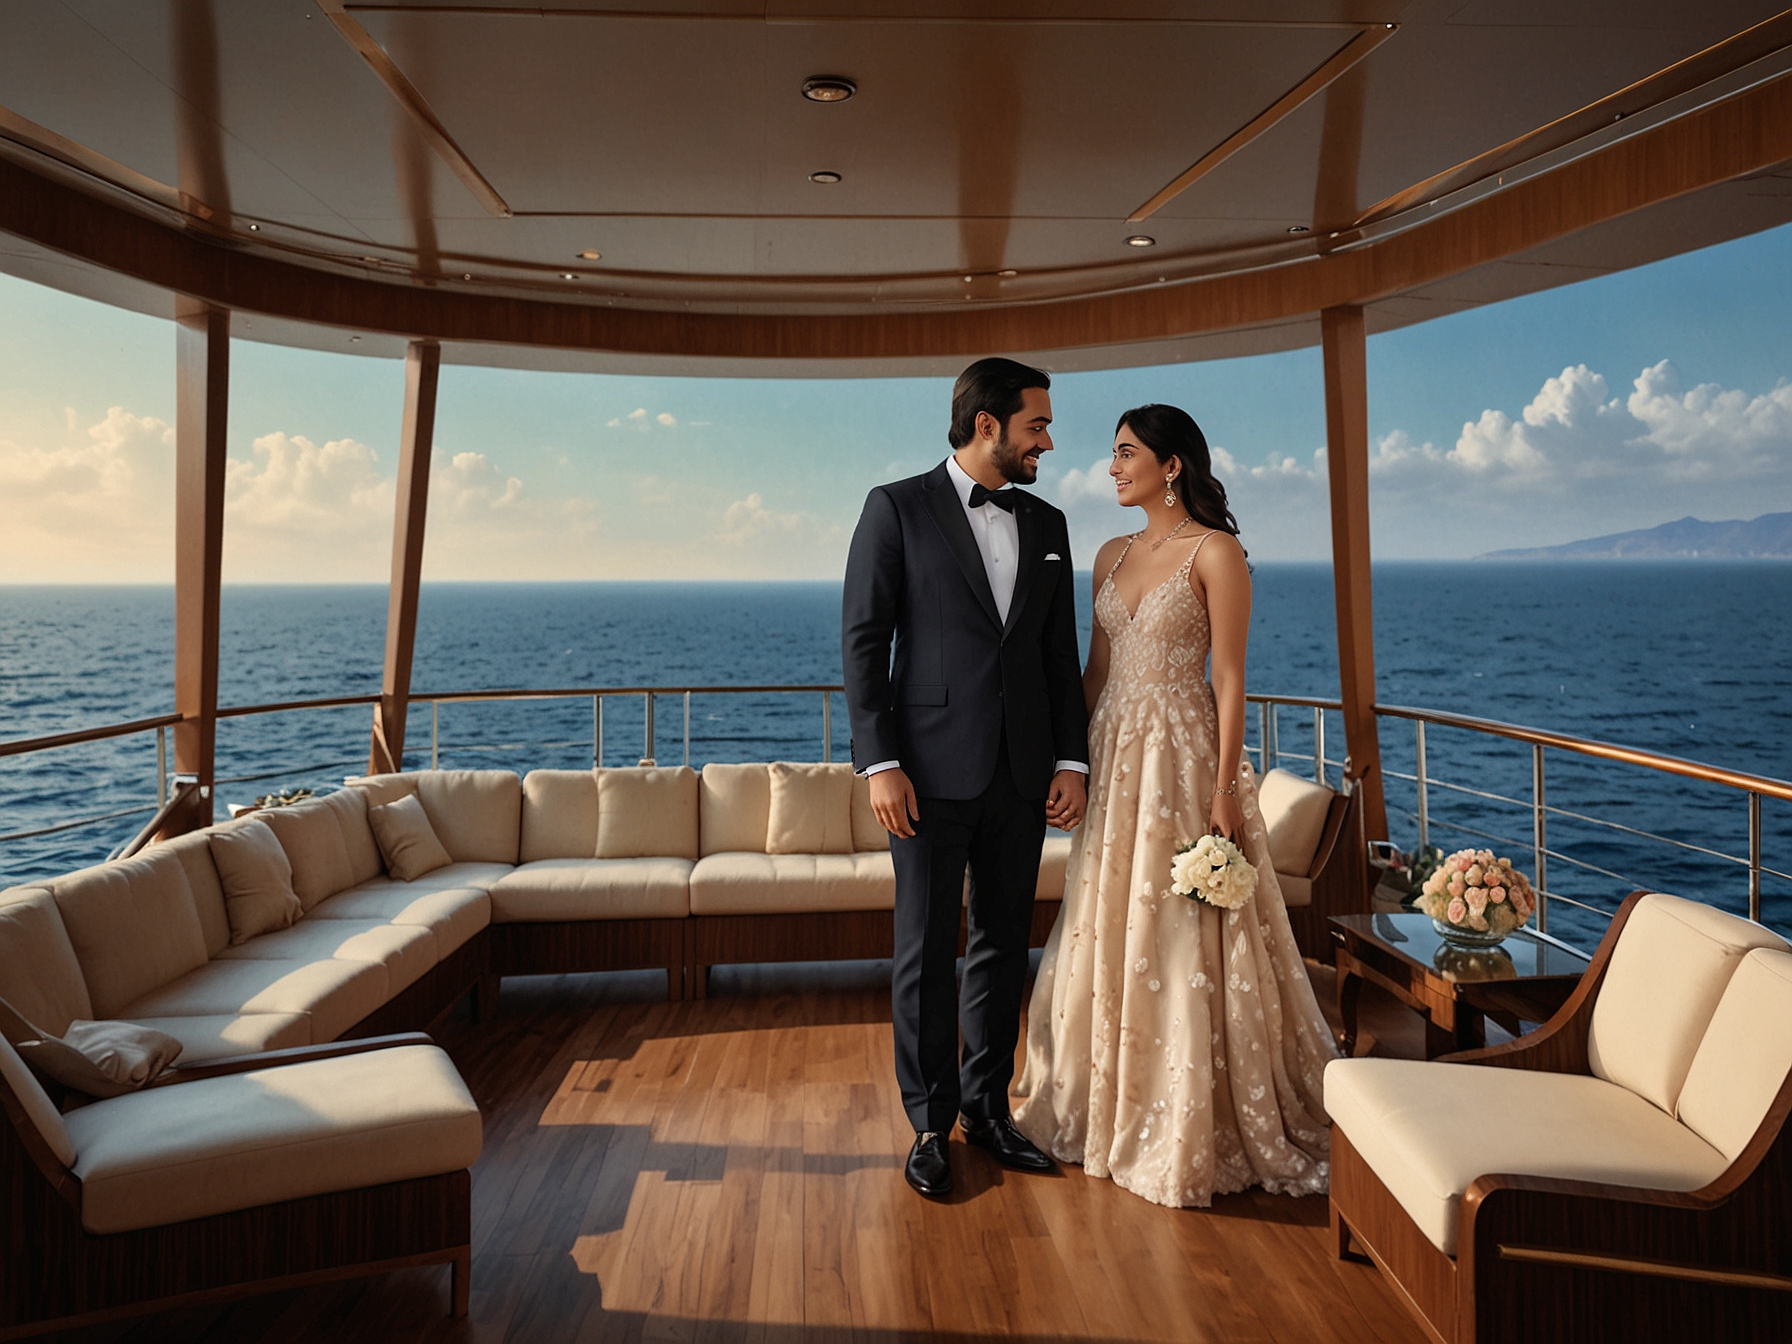 The luxurious Mediterranean cruise enhanced the magnificence of Anant Ambani and Radhika Merchant's pre-wedding celebrations, with picturesque views, exquisite decorations, and elite guests.